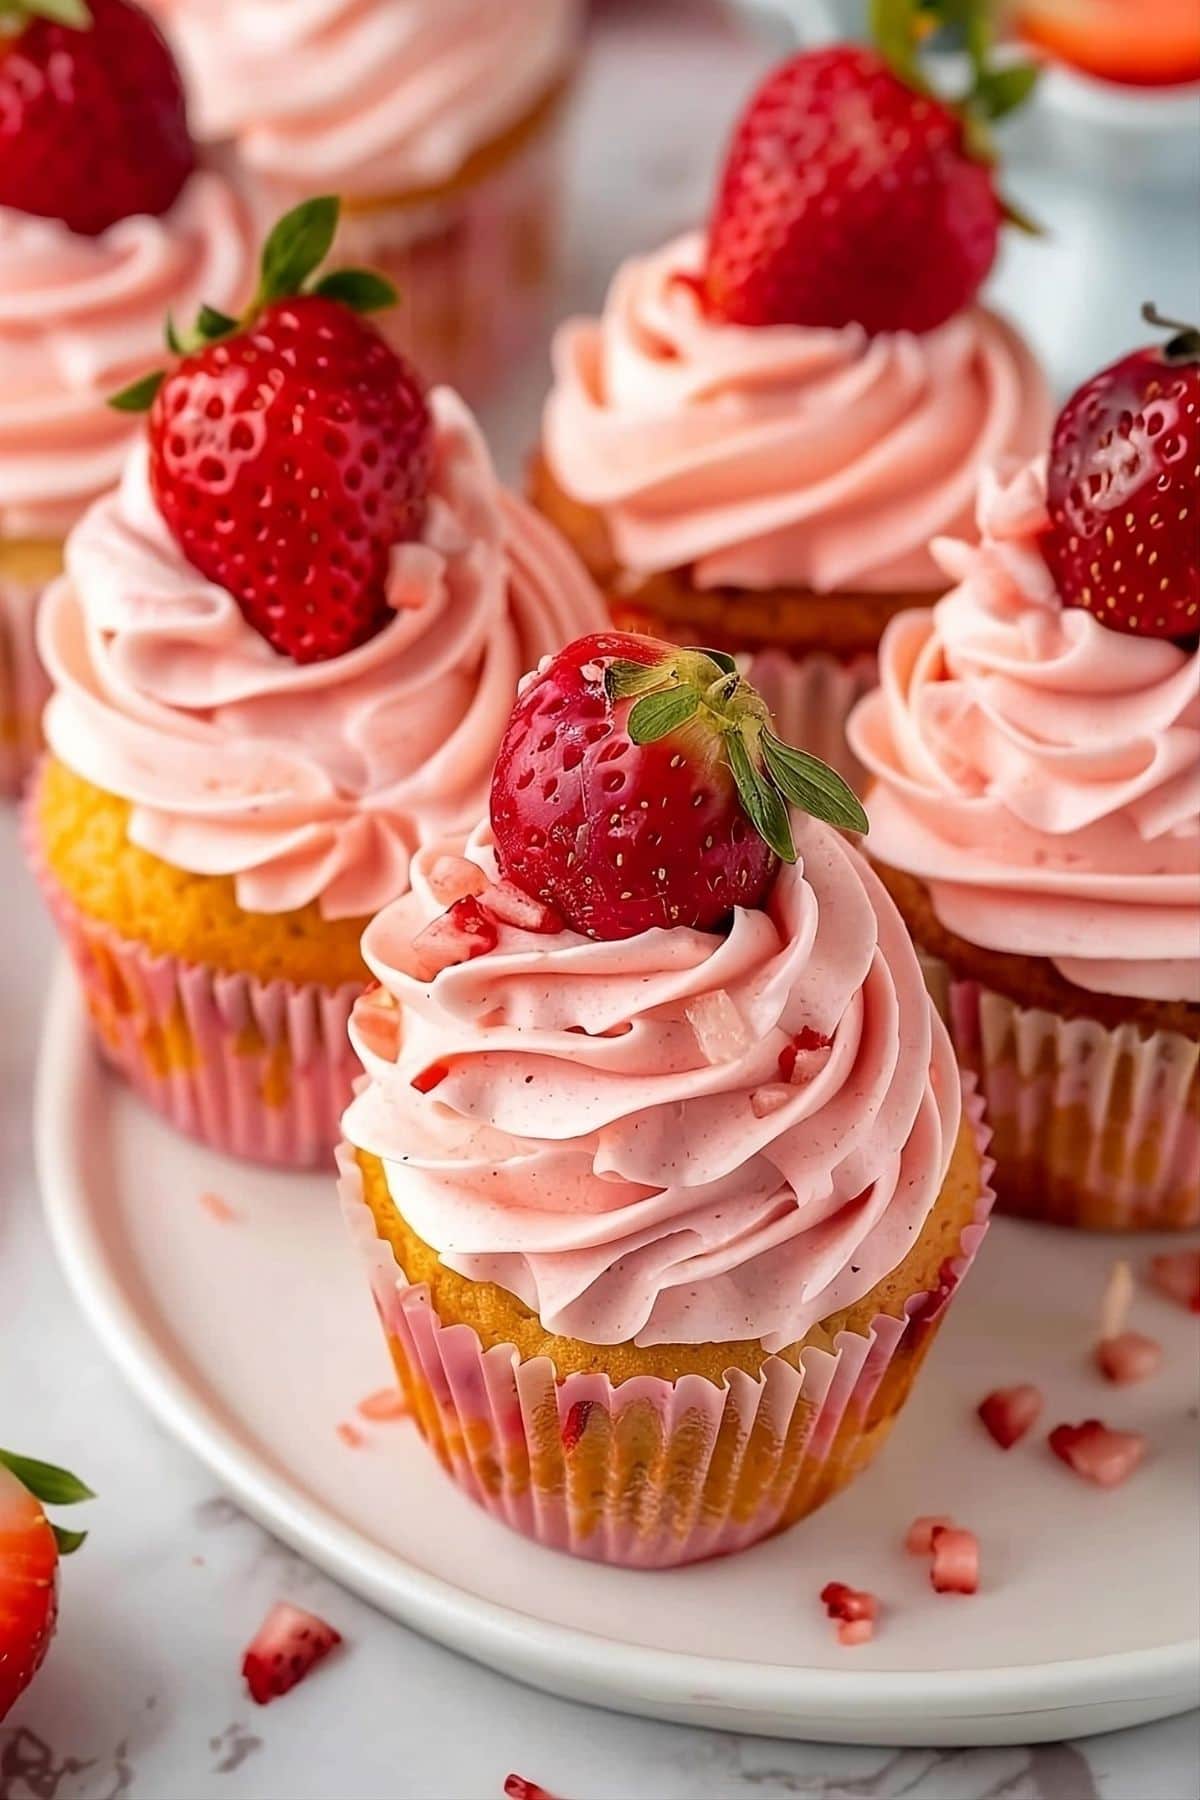 Strawberry cupcakes with strawberry buttercream frosting served in a white plate.